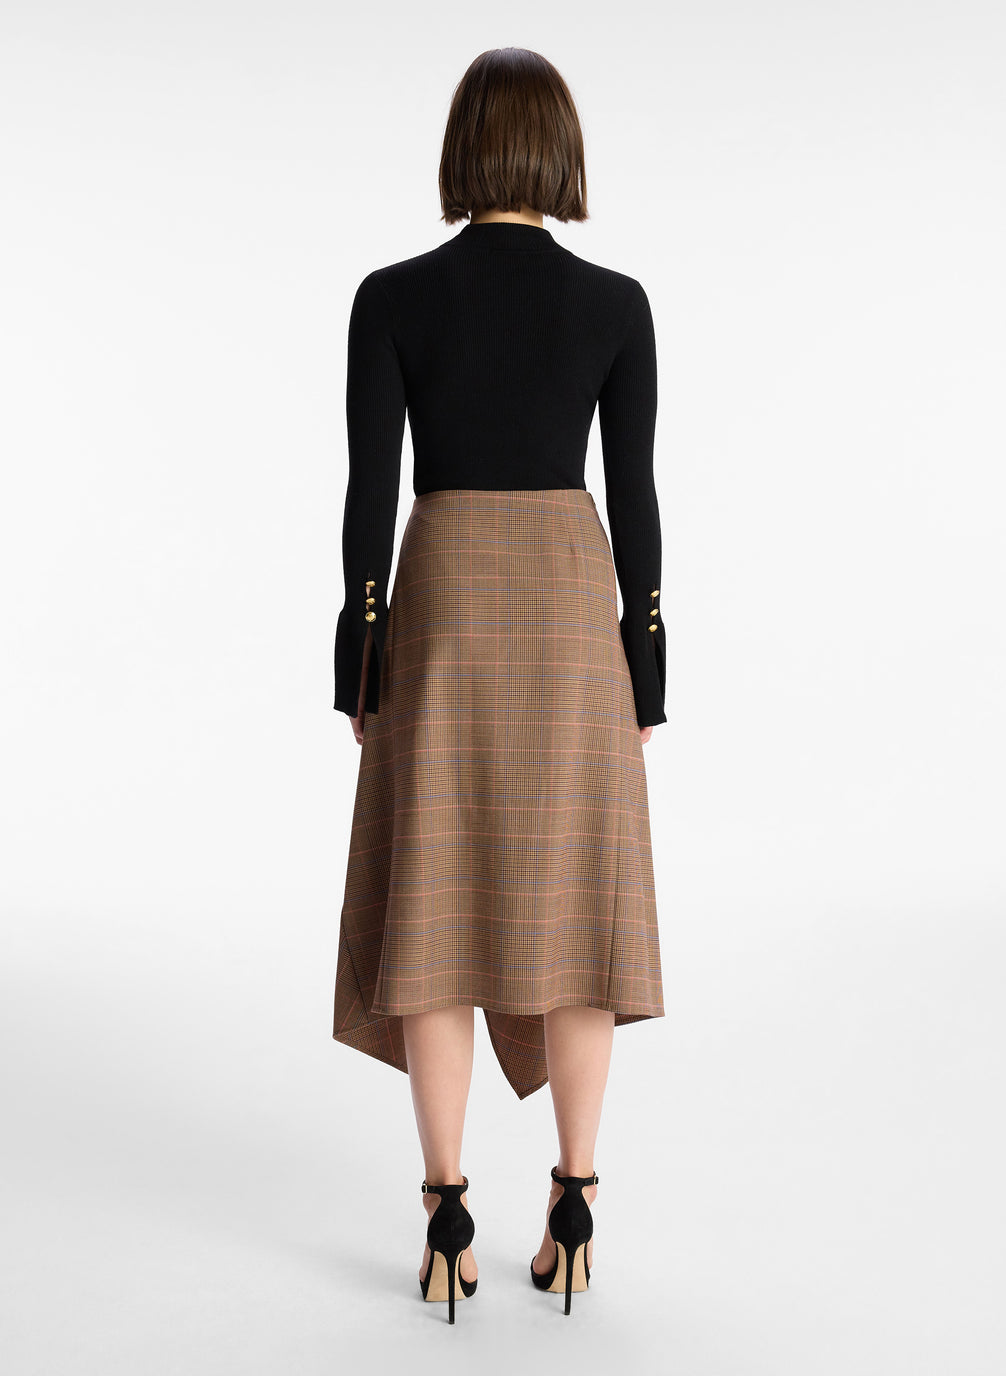 back  view of woman wearing black sweater and brown plaid asymmetric midi skirt